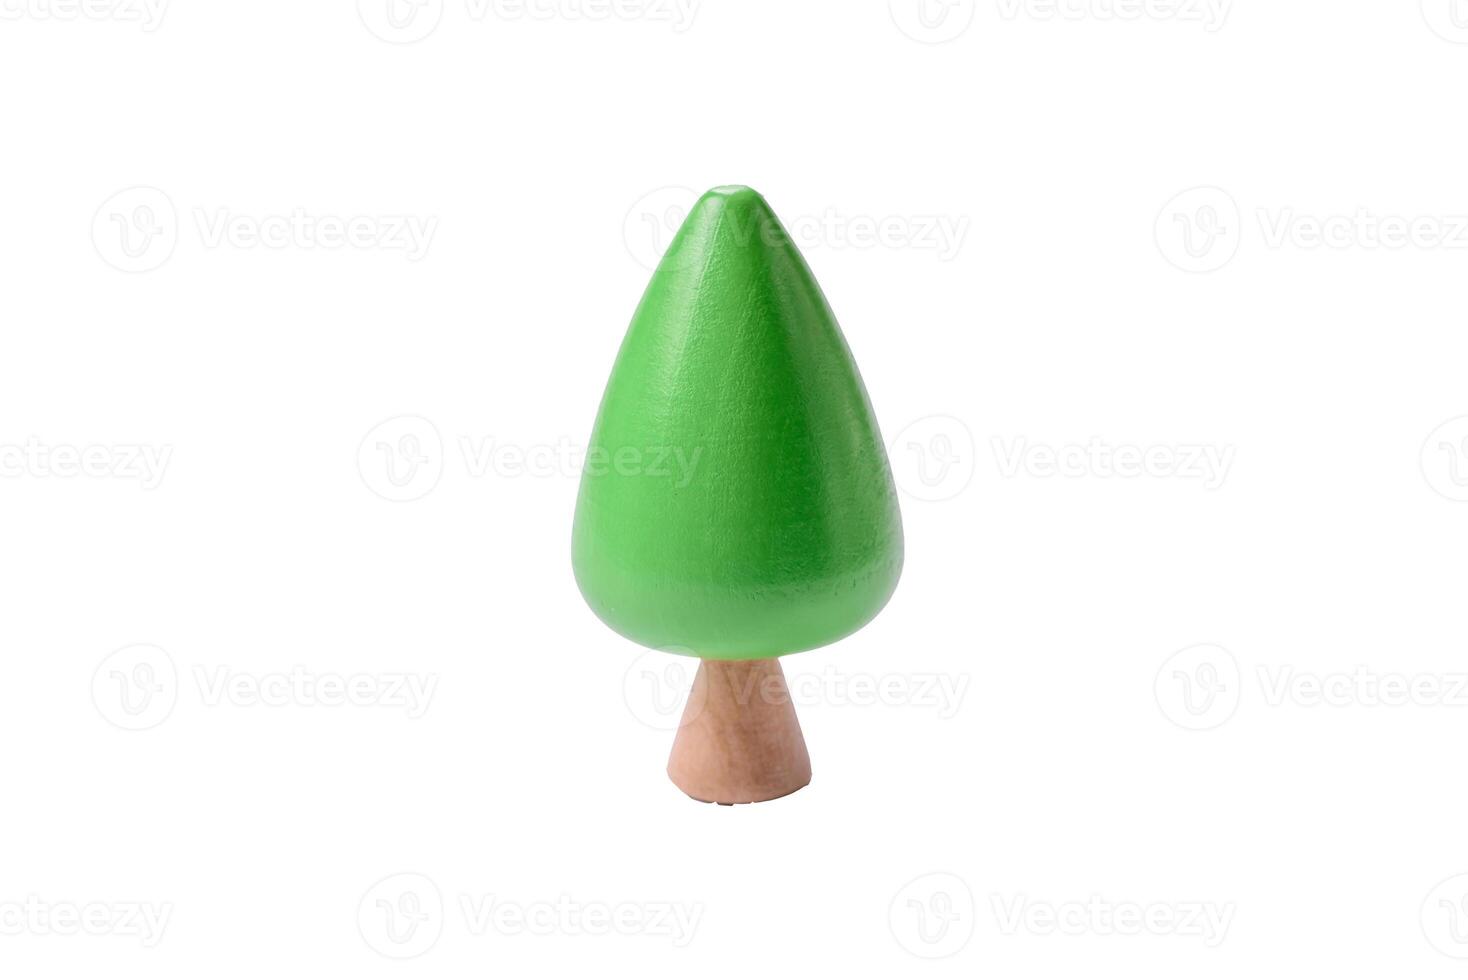 Wooden model of a tree with a green crown and trunk on a white background photo